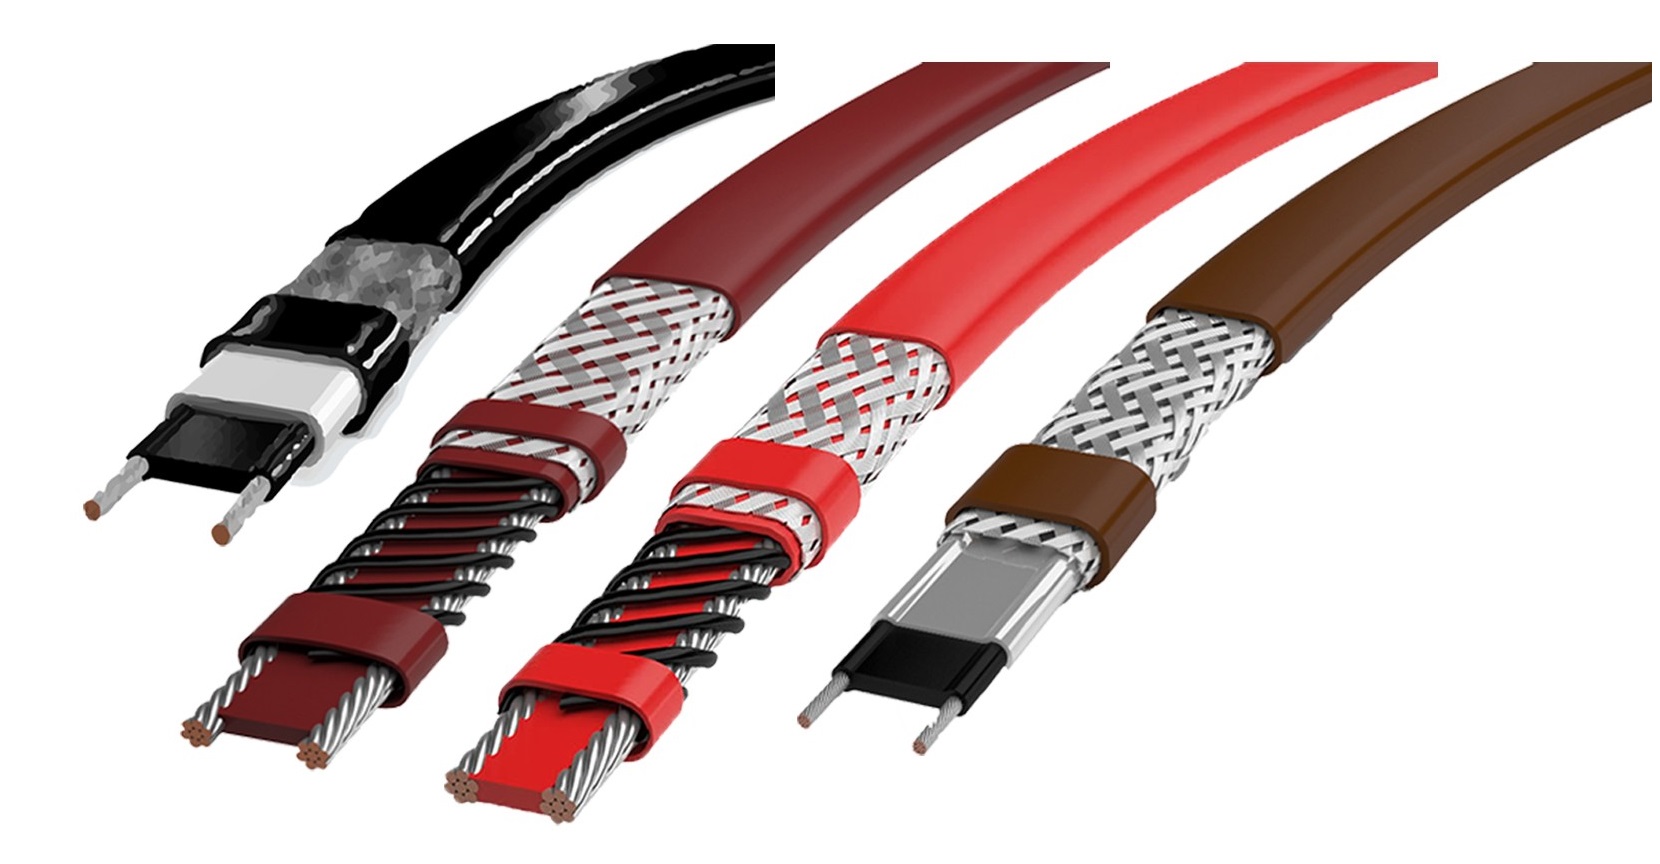 Self-regulating Electric Heating Cable Market